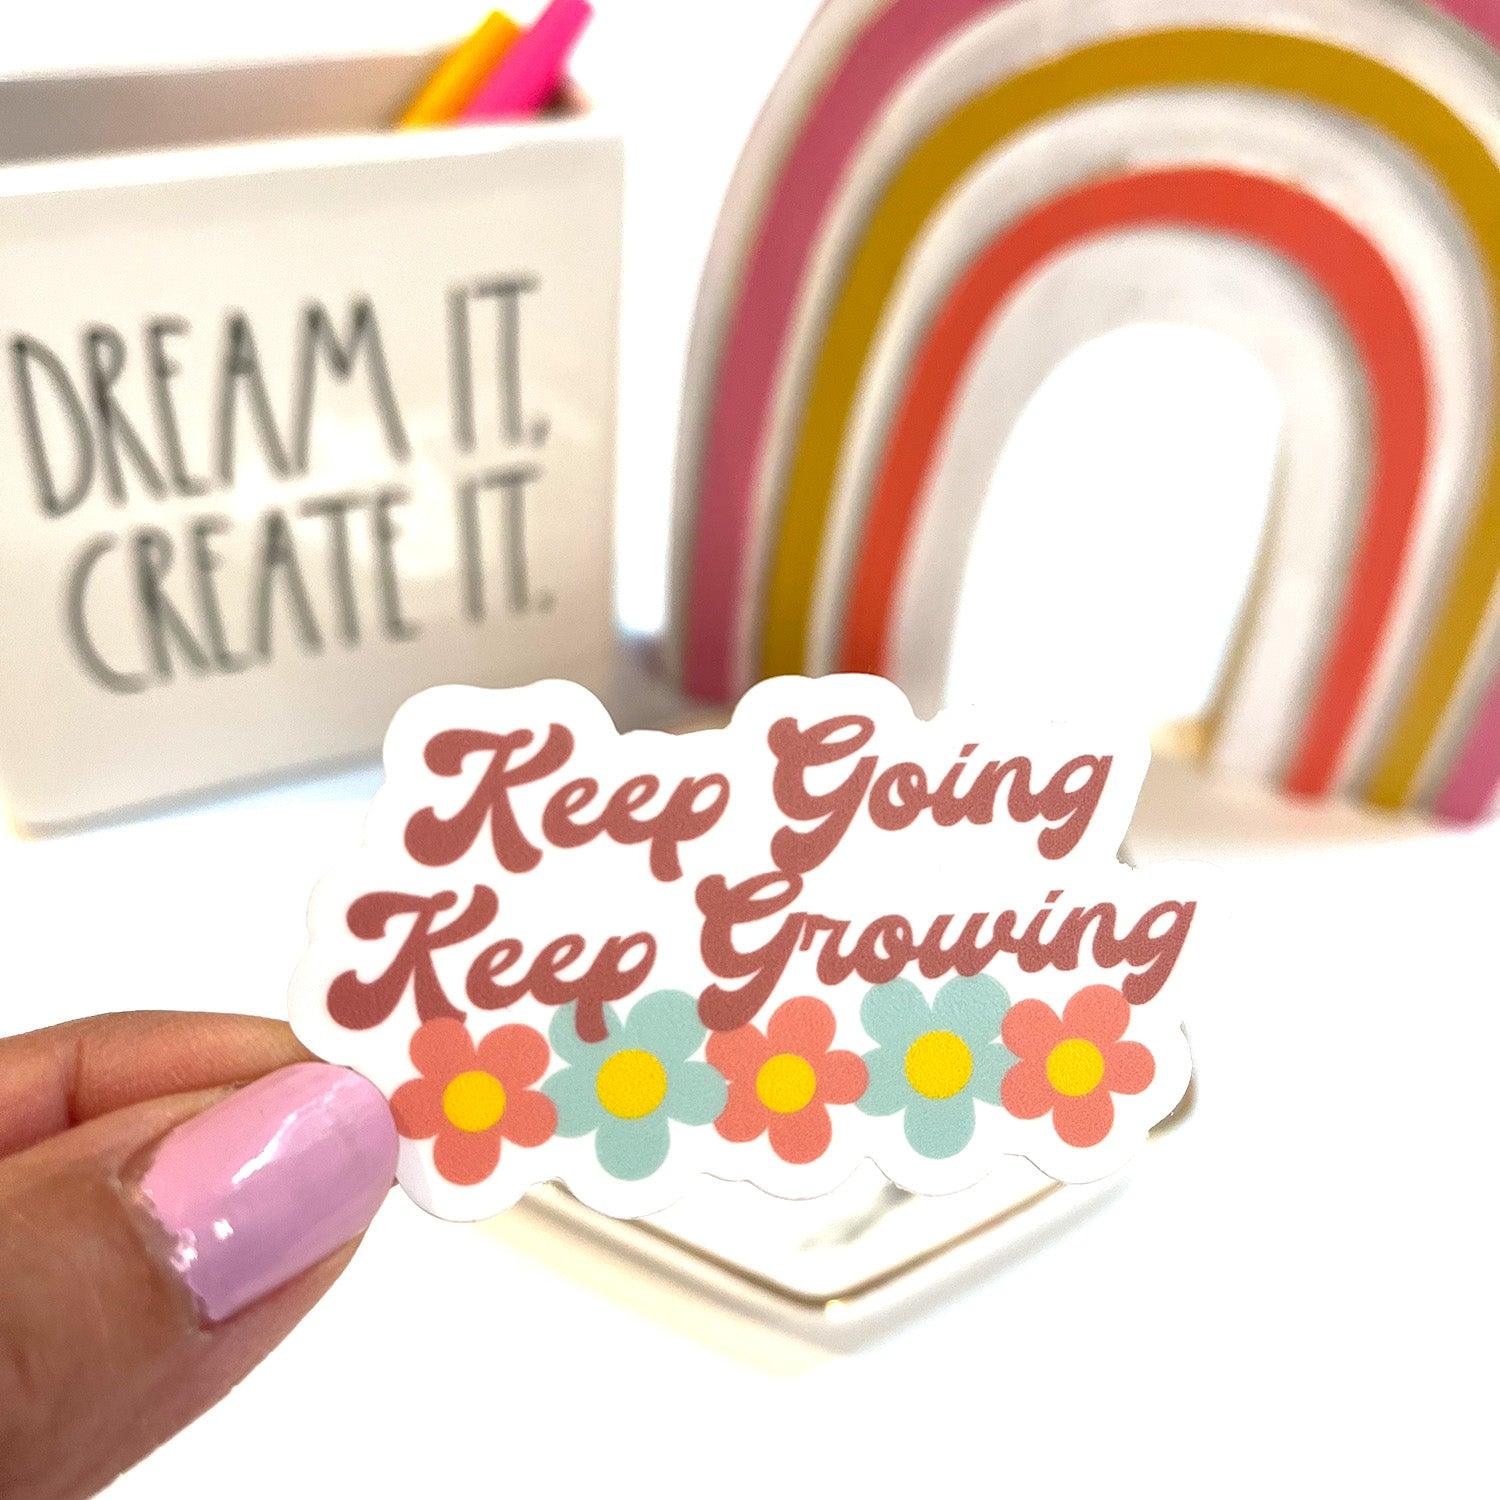 Keep going keep growing sticker shown indoors with rainbow background